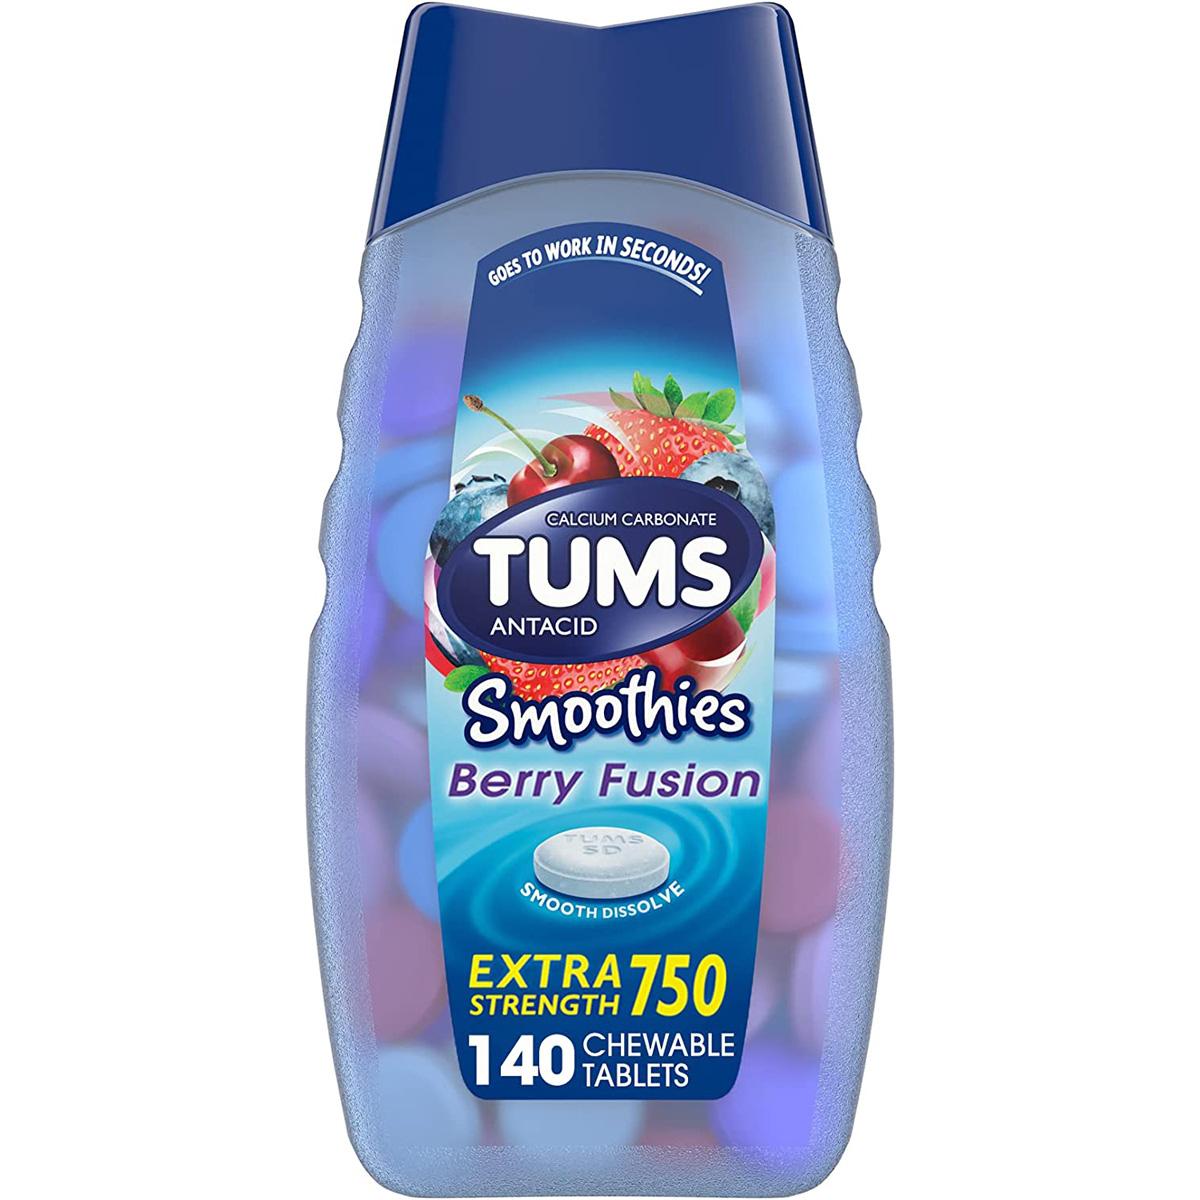 TUMS Smoothies Extra Strength Antacid Tablets 140 Count for $4.35 Shipped